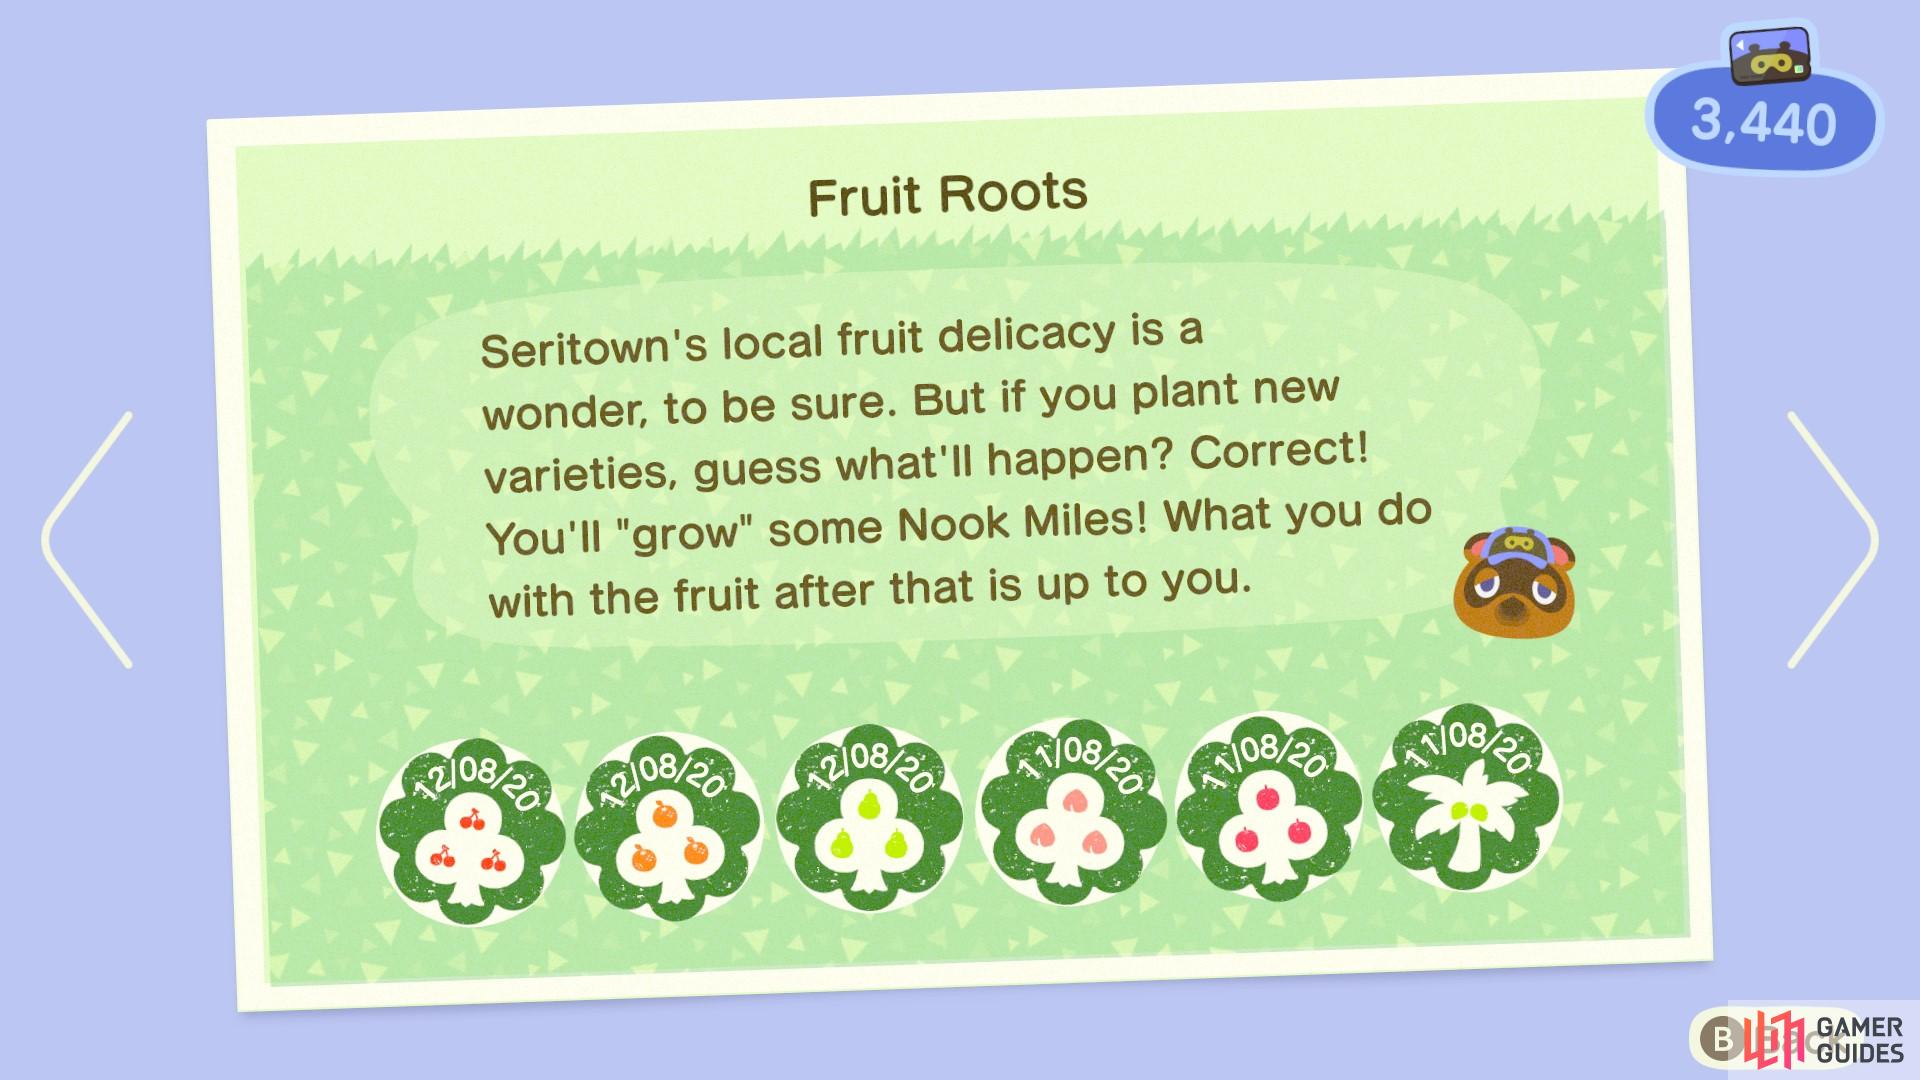 Planting non-native fruit trees will earn you some Nook Miles.